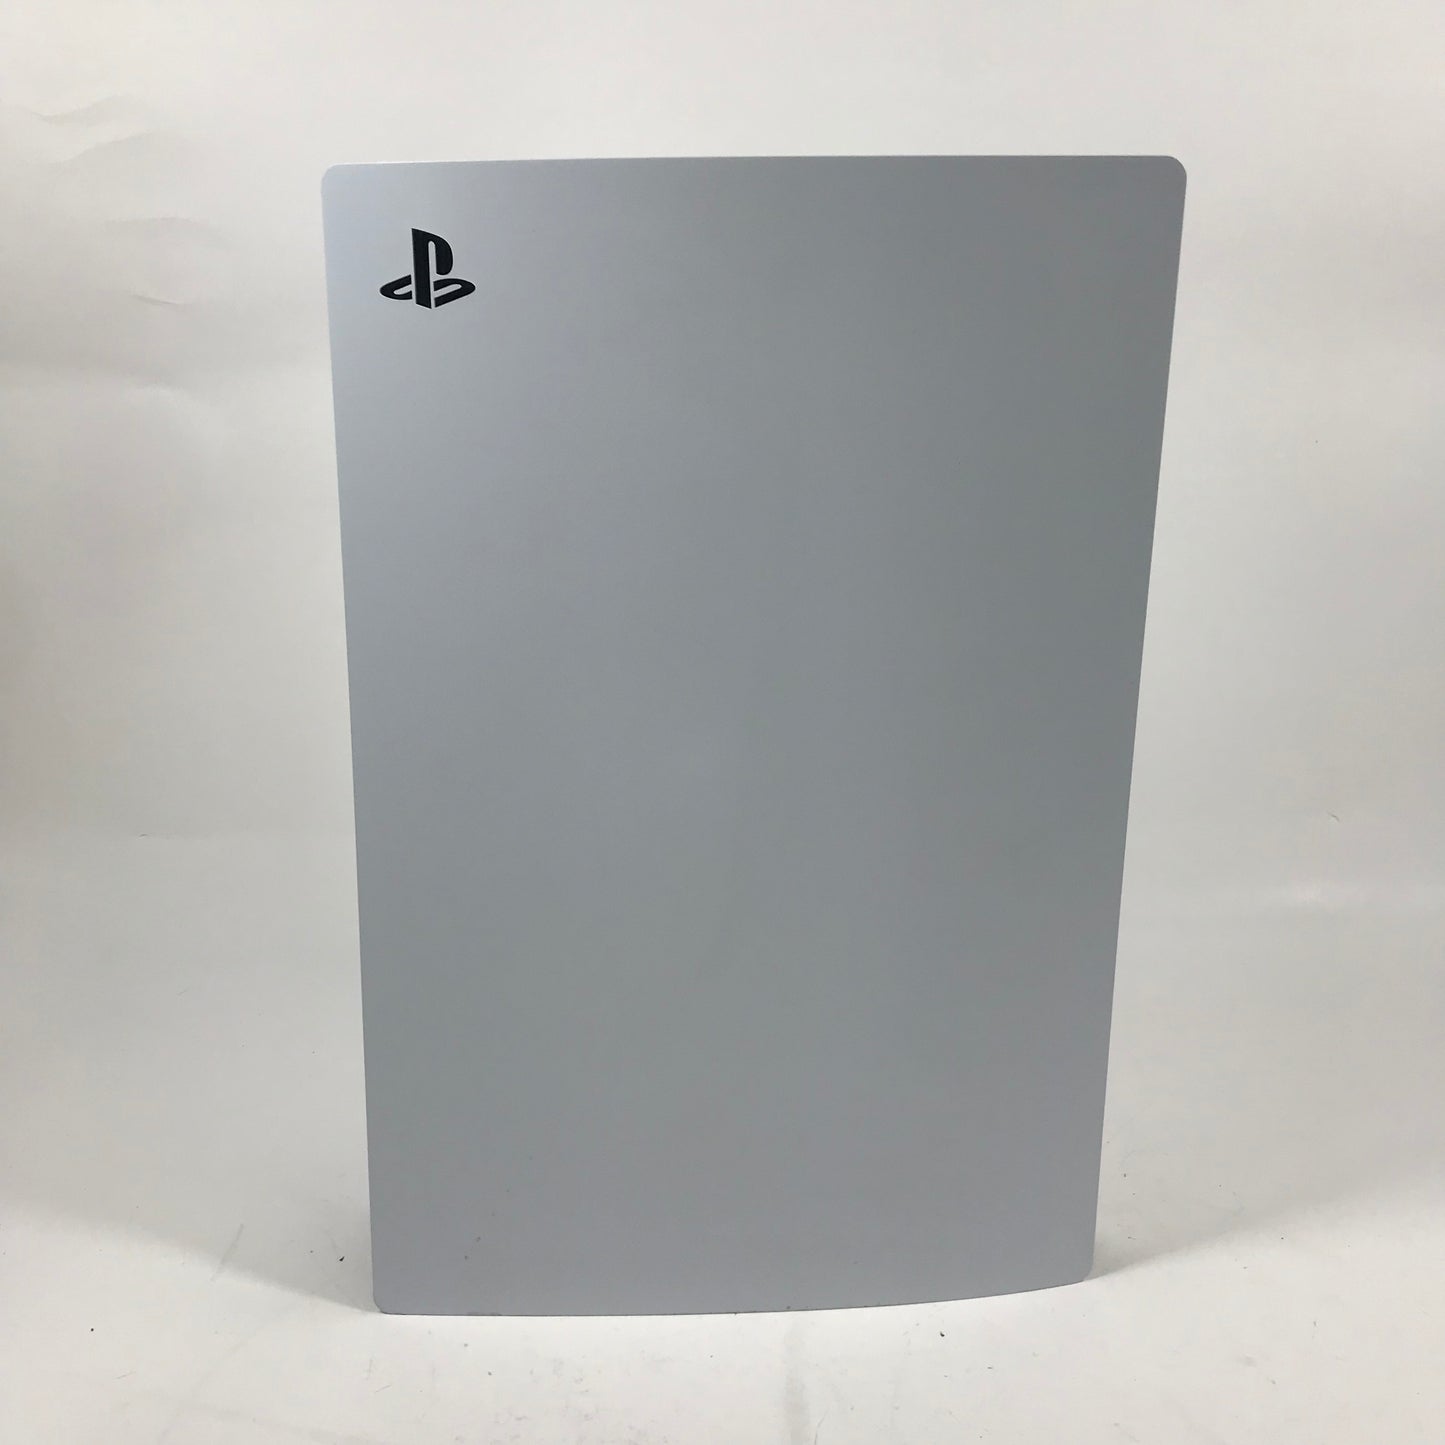 Sony PlayStation 5 Digital Edition PS5 825GB White Console Gaming System Only